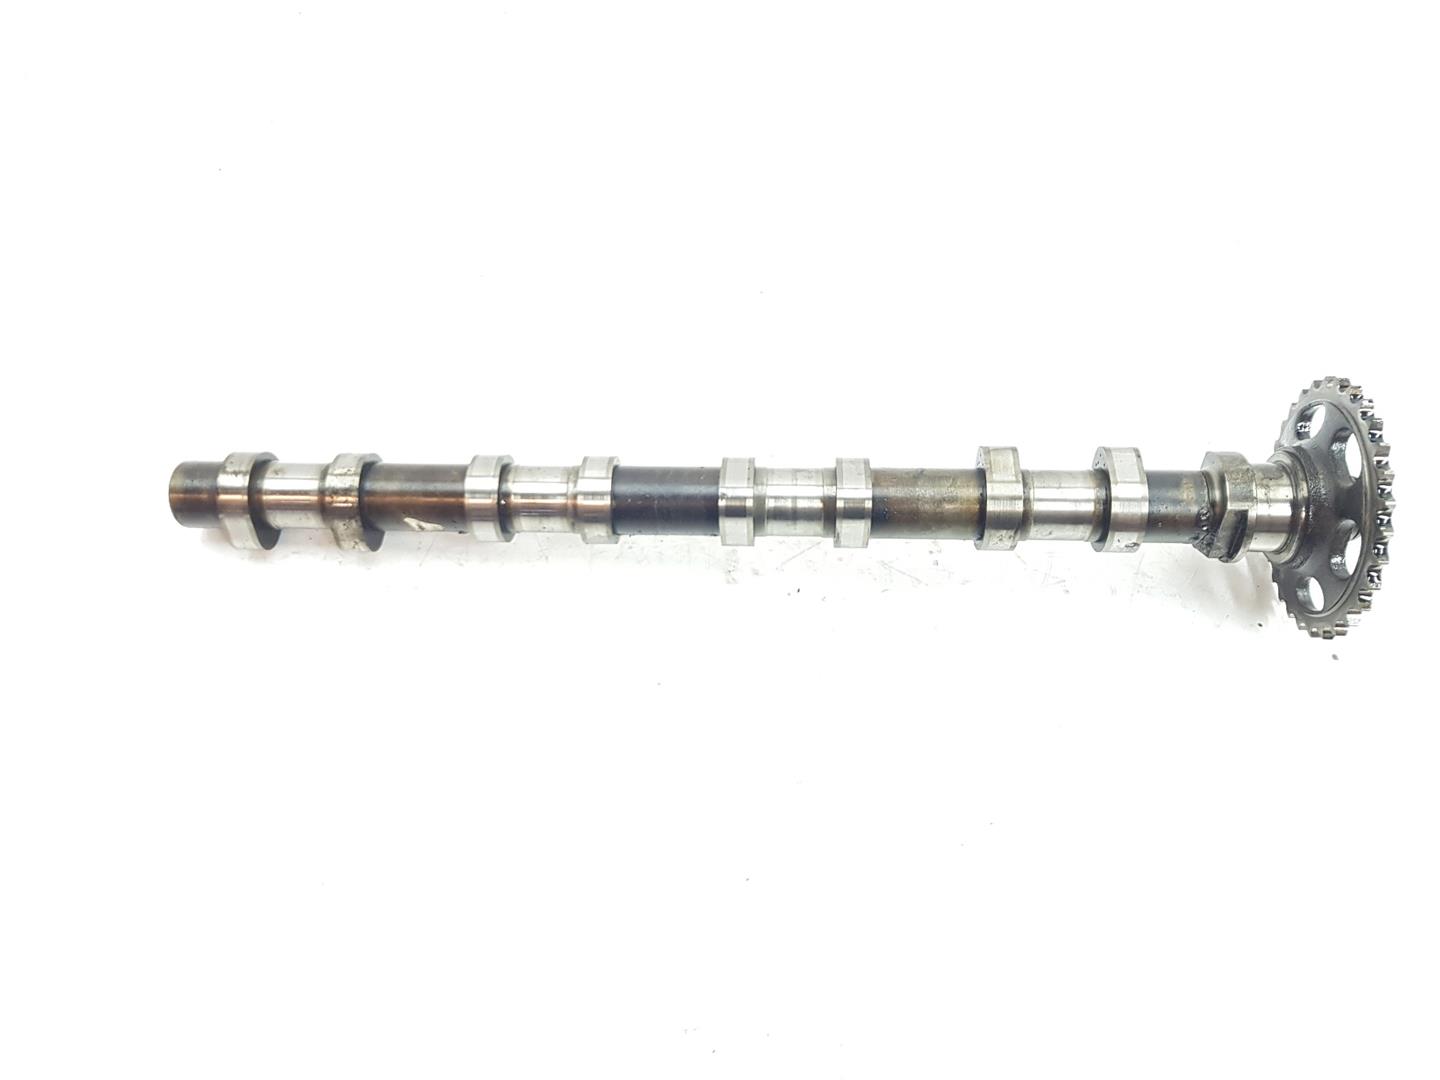 MERCEDES-BENZ M-Class W166 (2011-2015) Exhaust Camshaft A6510500200, A6510500200, ADMISION 24133912